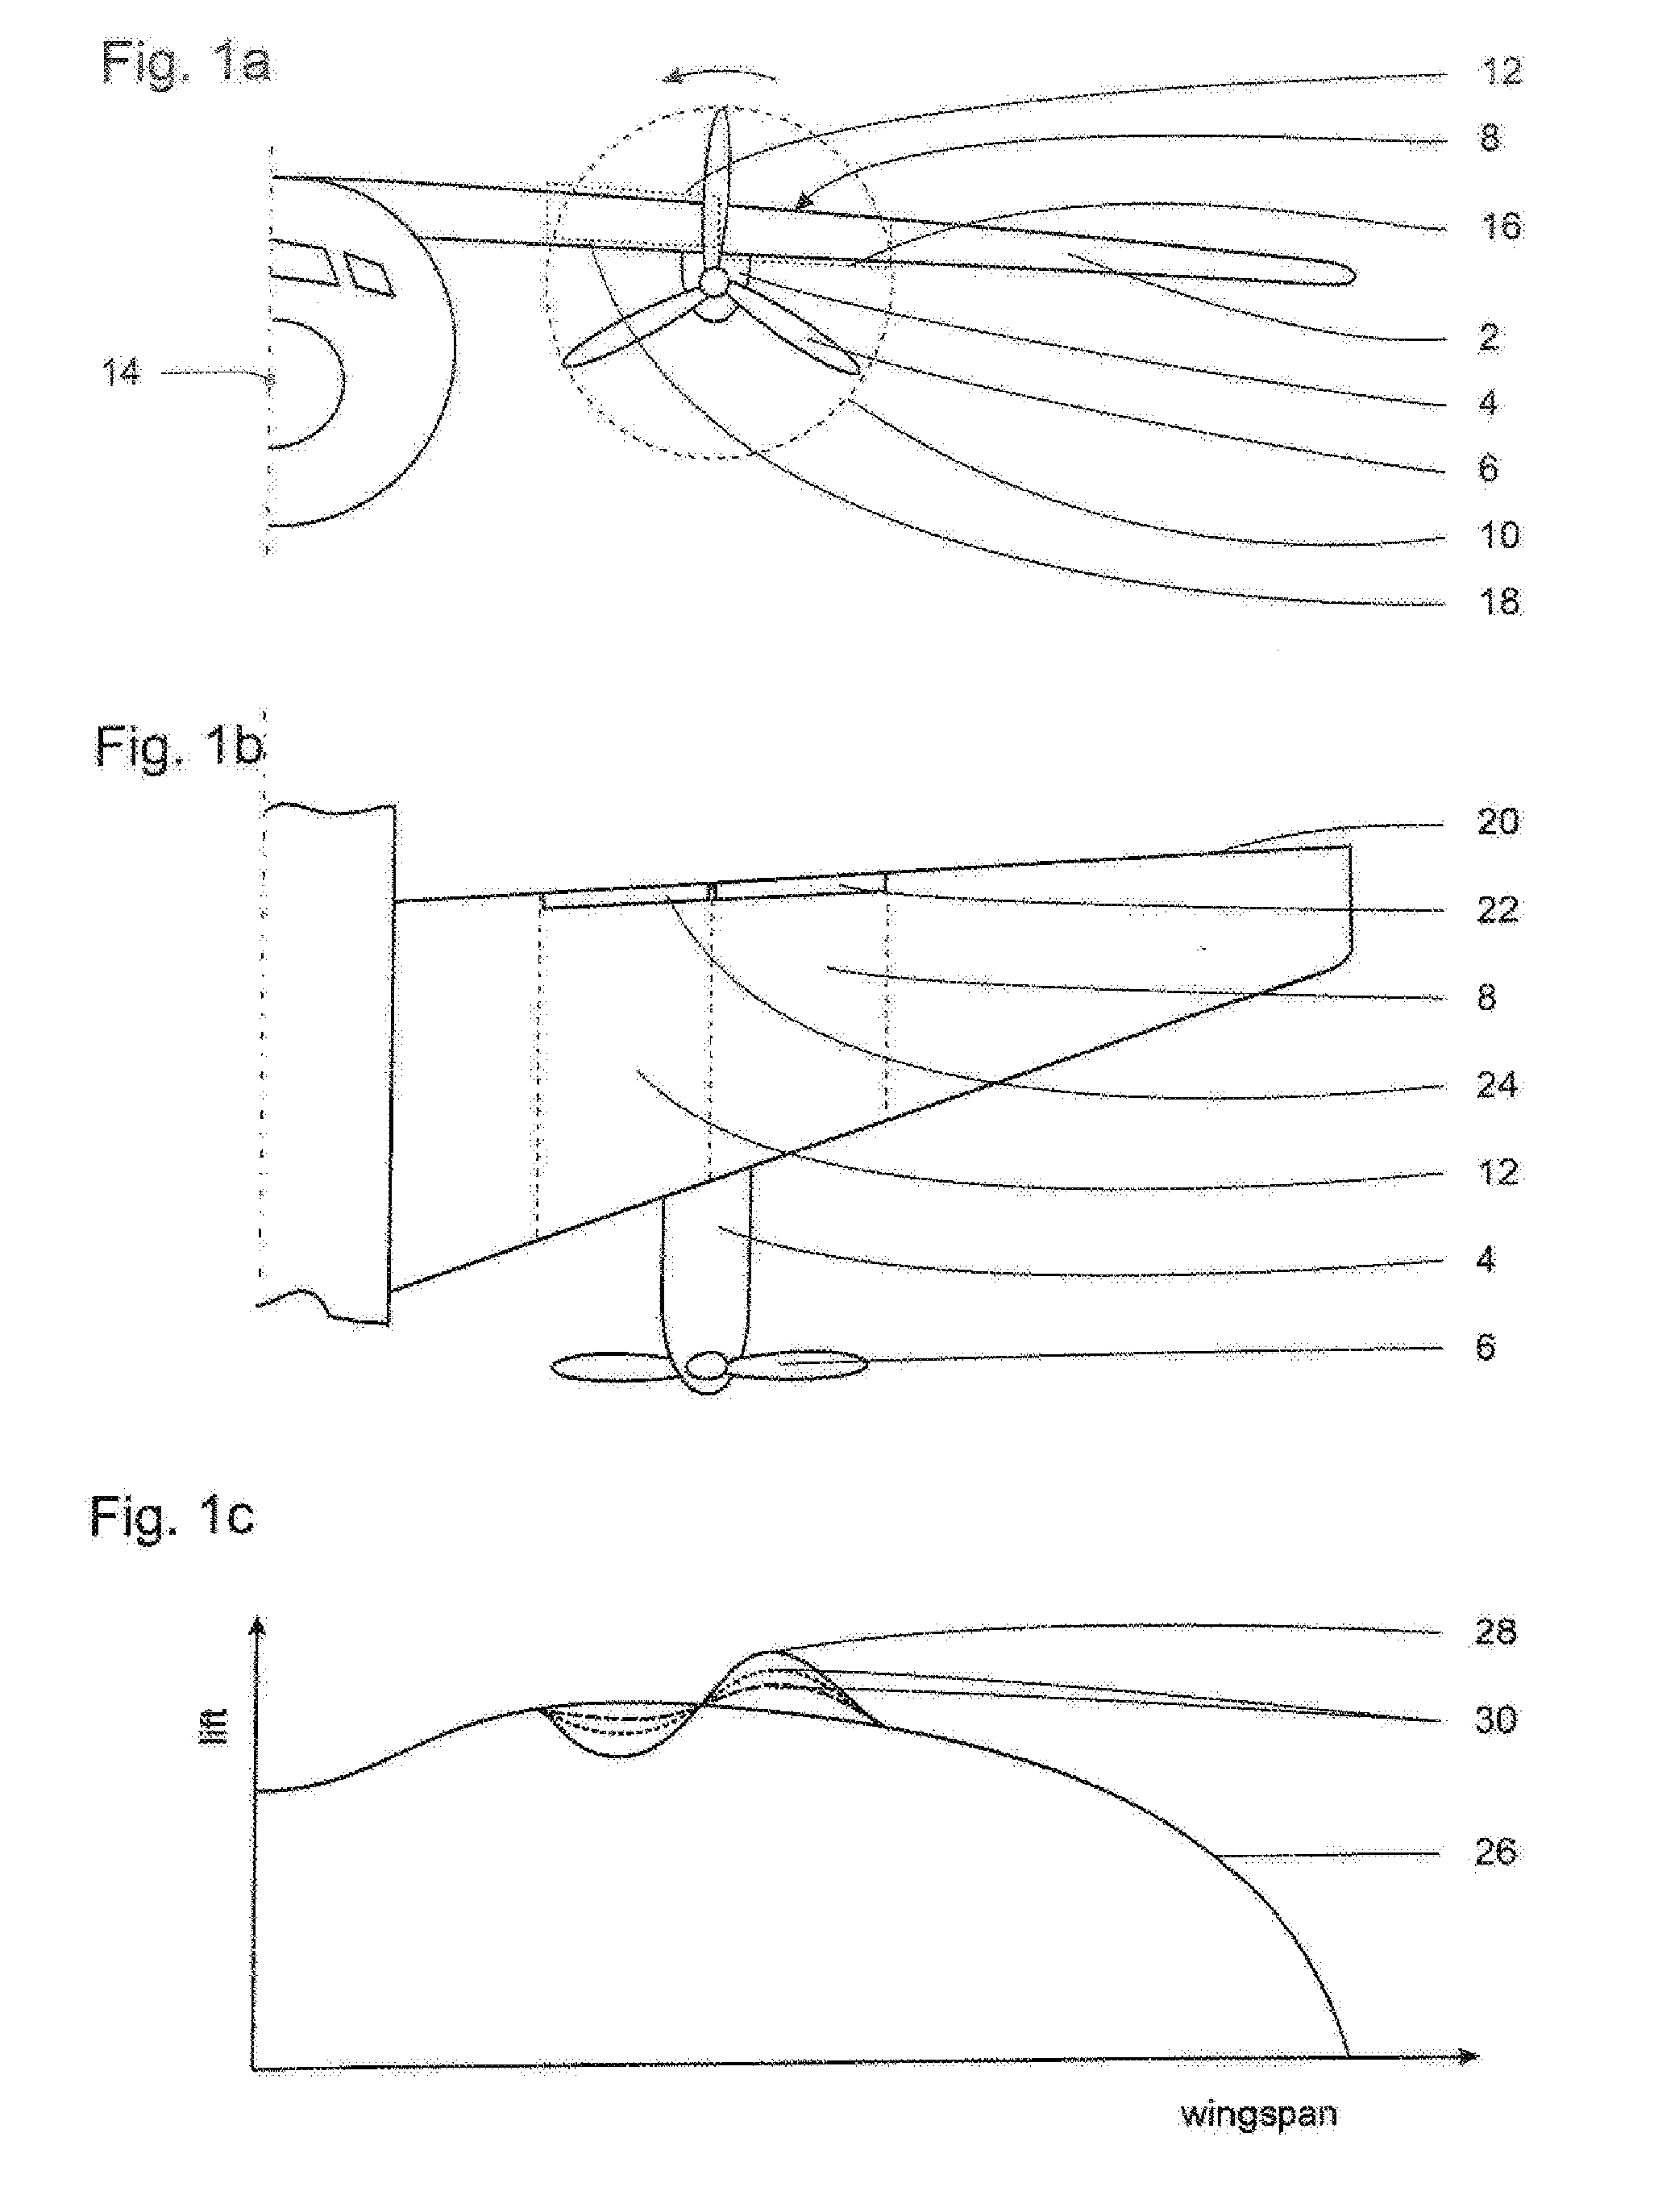 Wing and method for reducing effects of propeller airflow on lift distribution